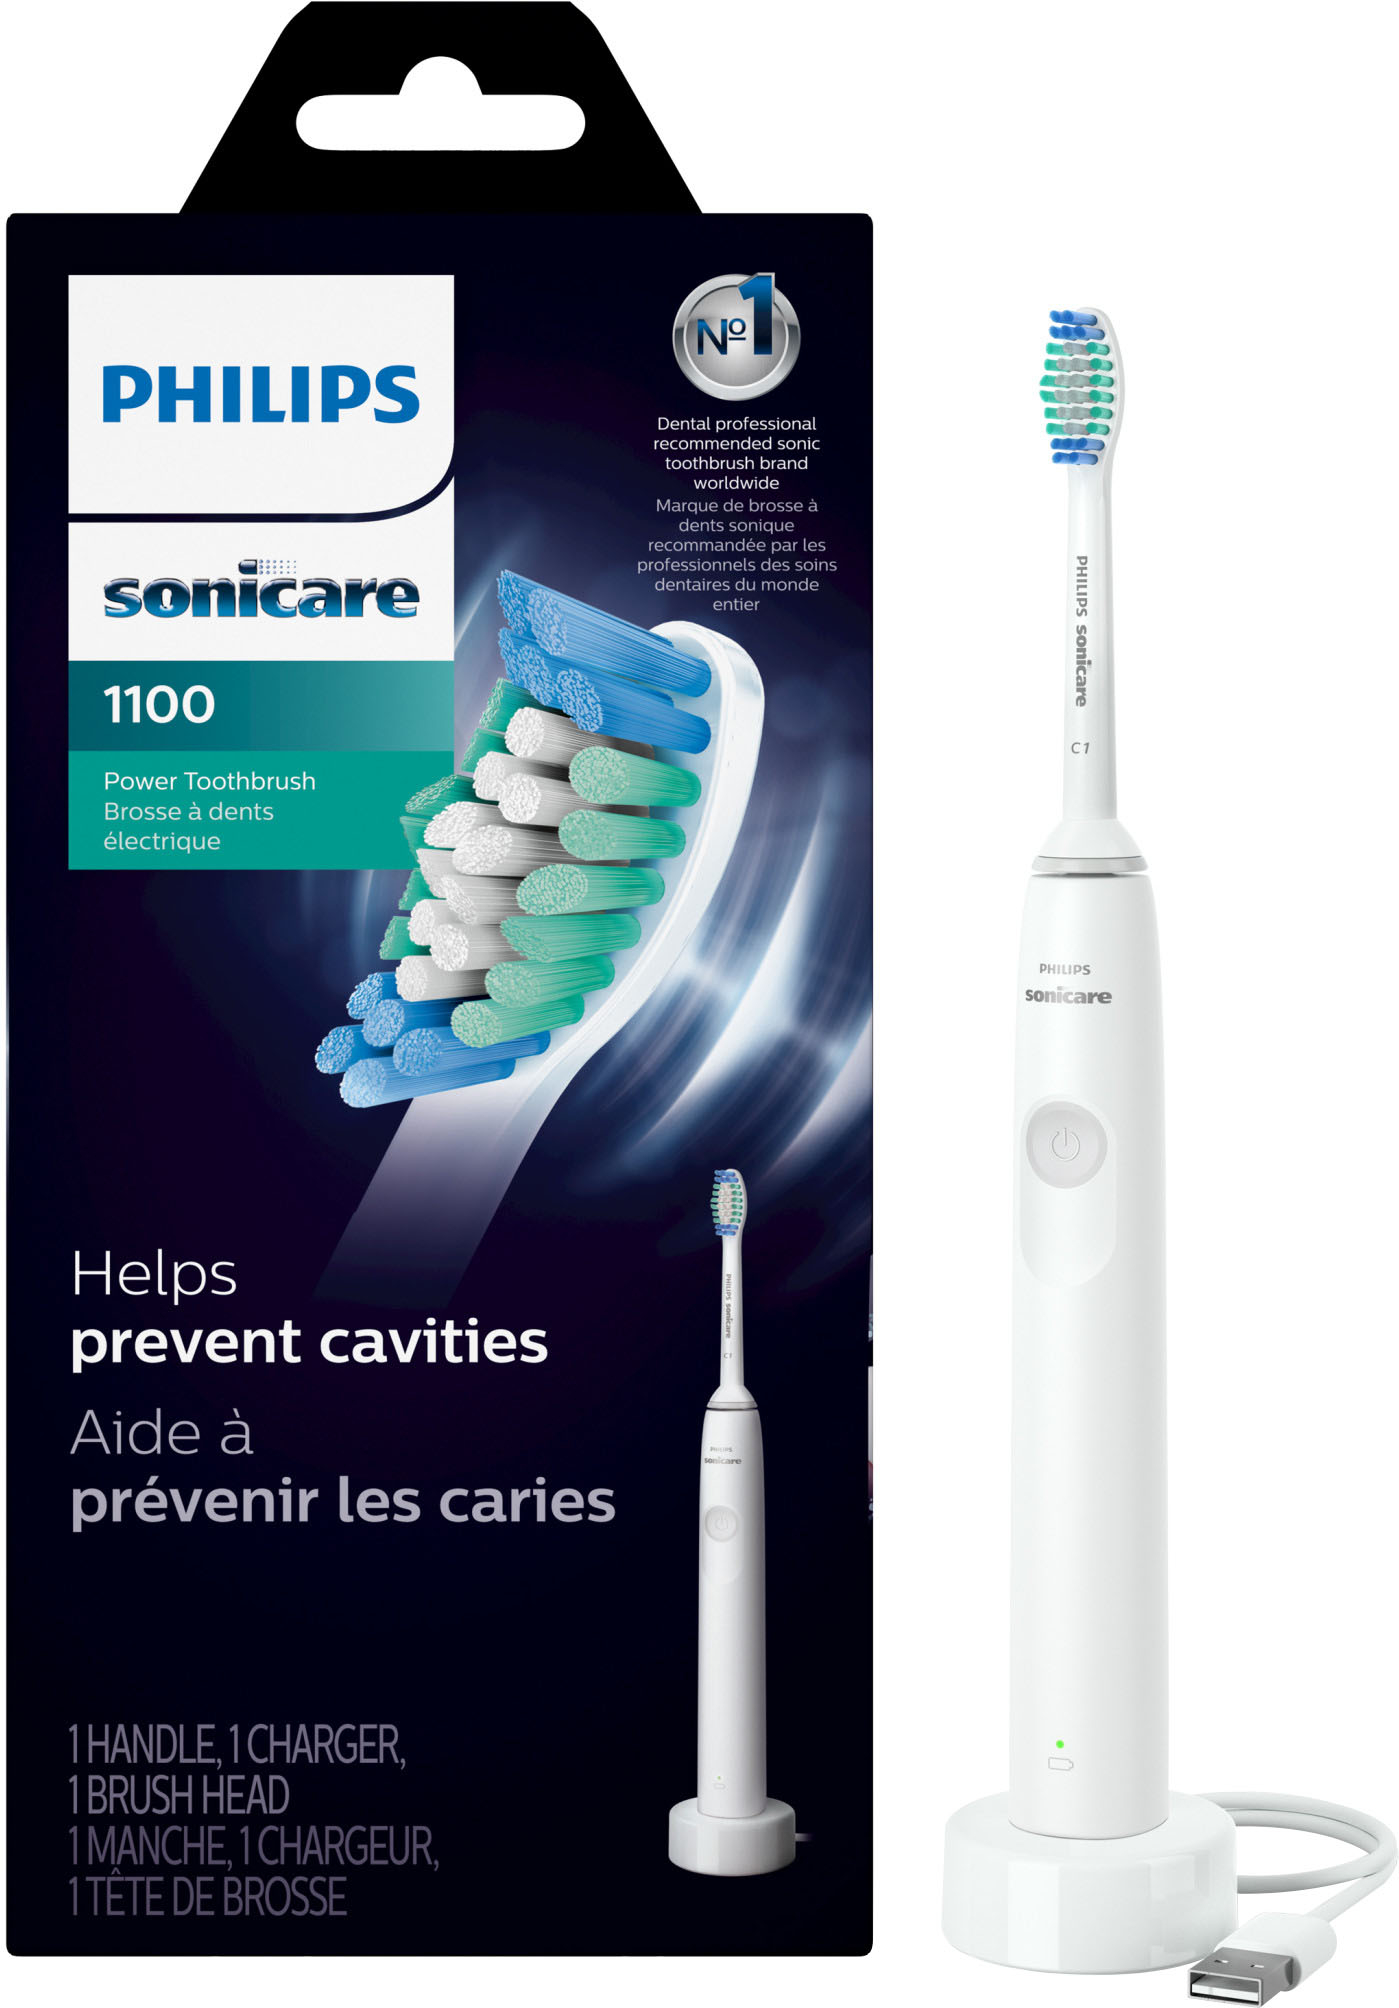 30-off-philips-sonicare-toothbrushes